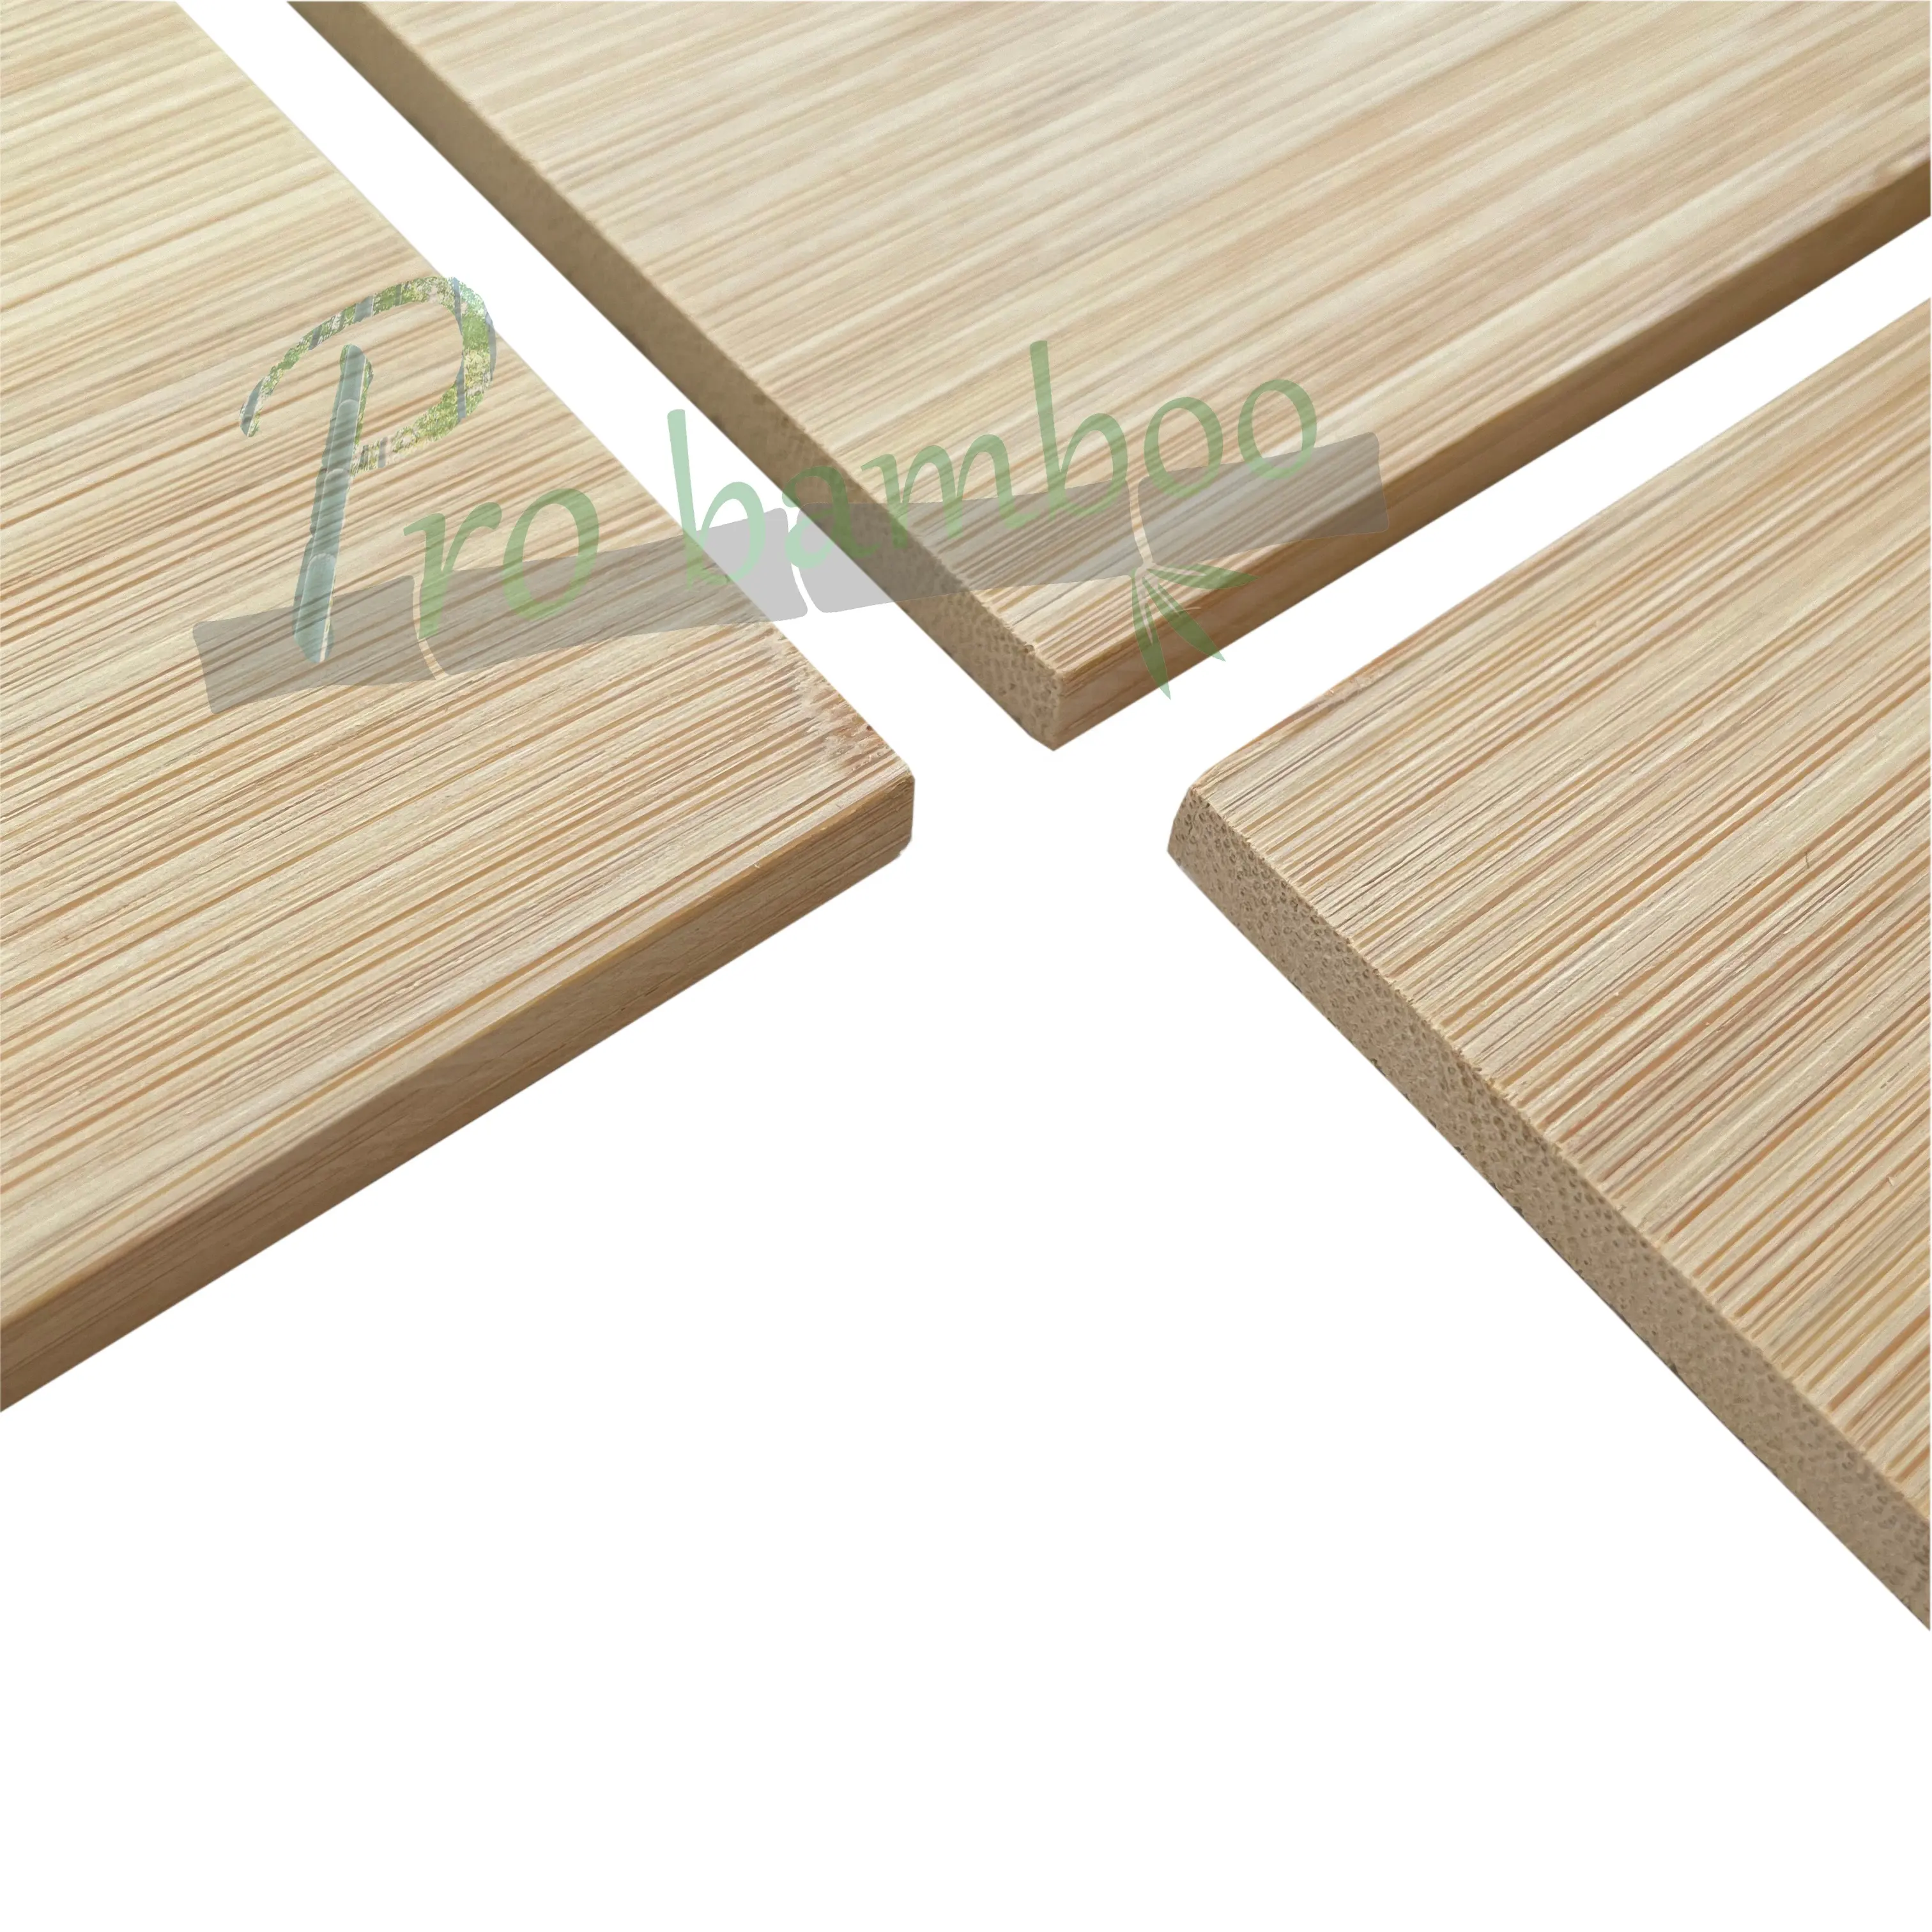 4 by 8 feet big size bamboo sheets natural caramel color plain horizontal cold pressed panels 1 ply single structure boards